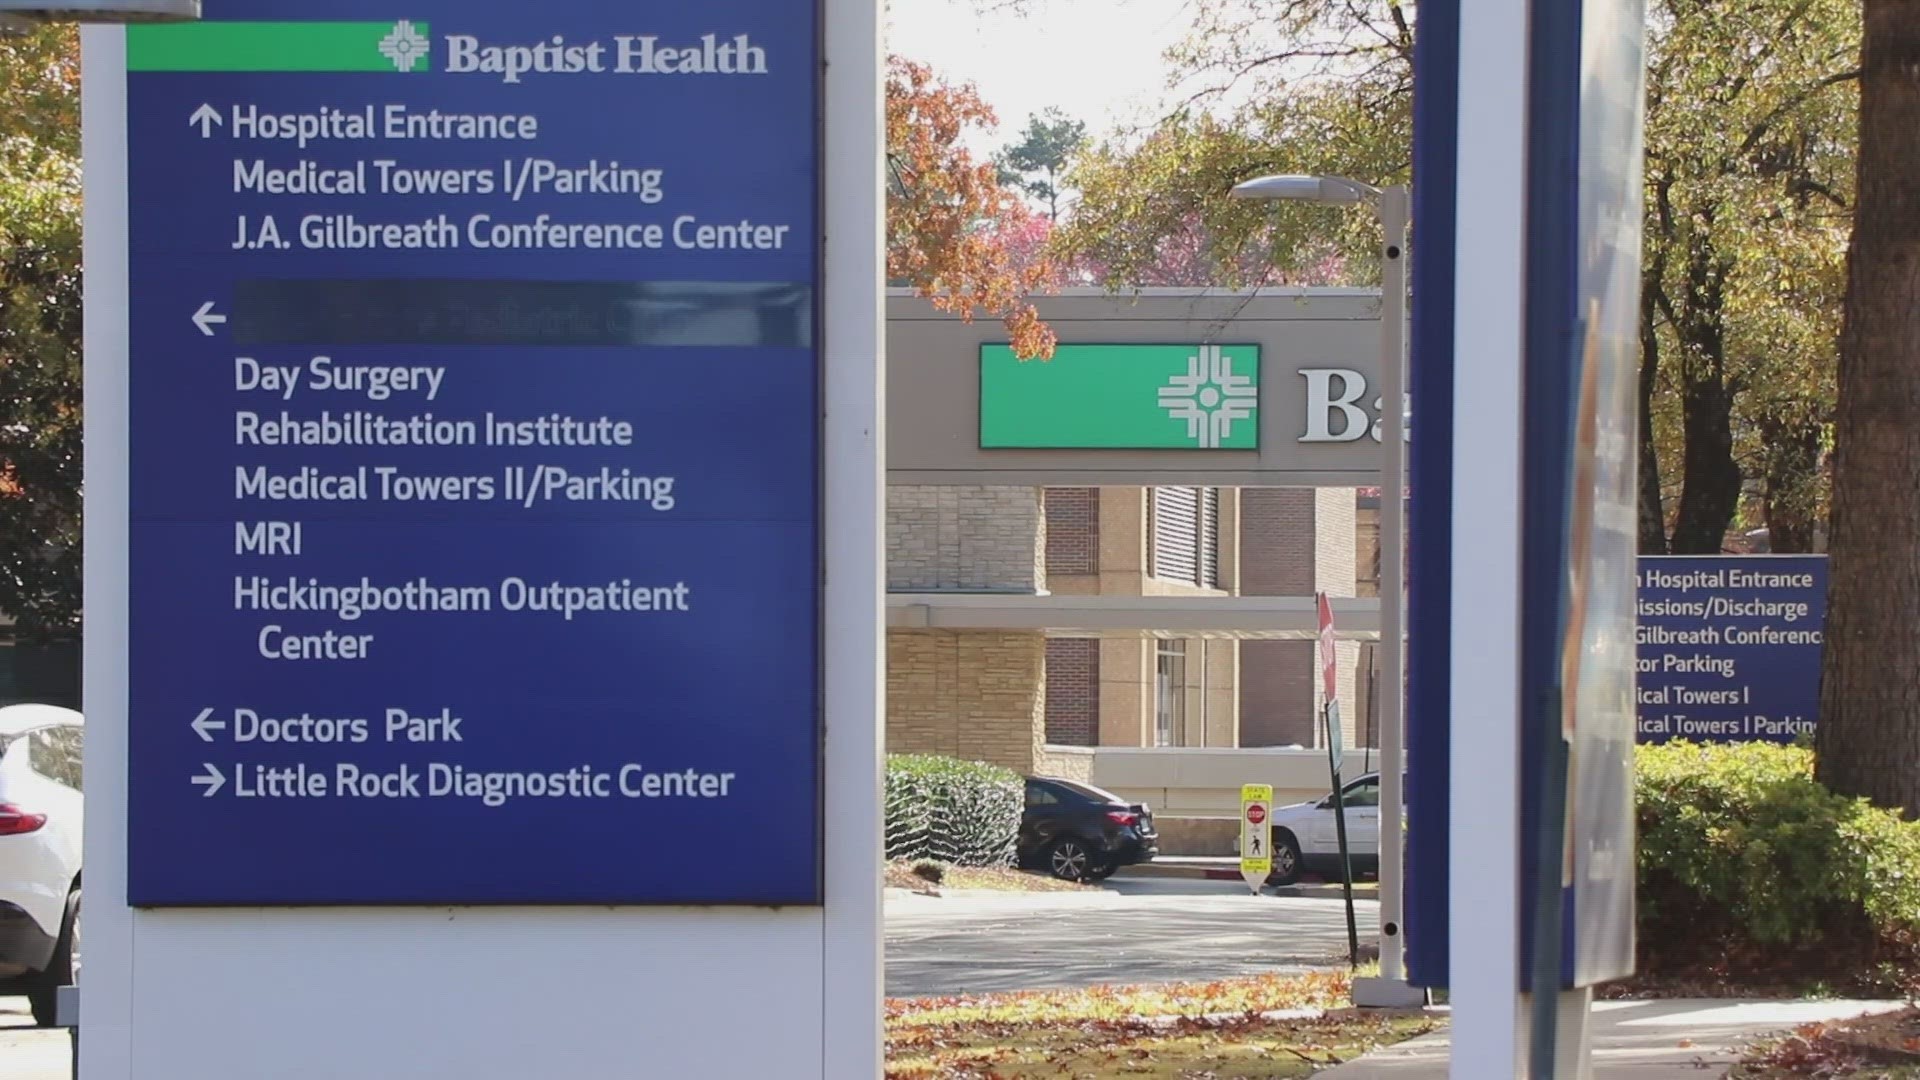 After months of negotiation, an agreement's been reached between Baptist Health and UnitedHealthcare, bringing coverage to many that were insured under the provider.